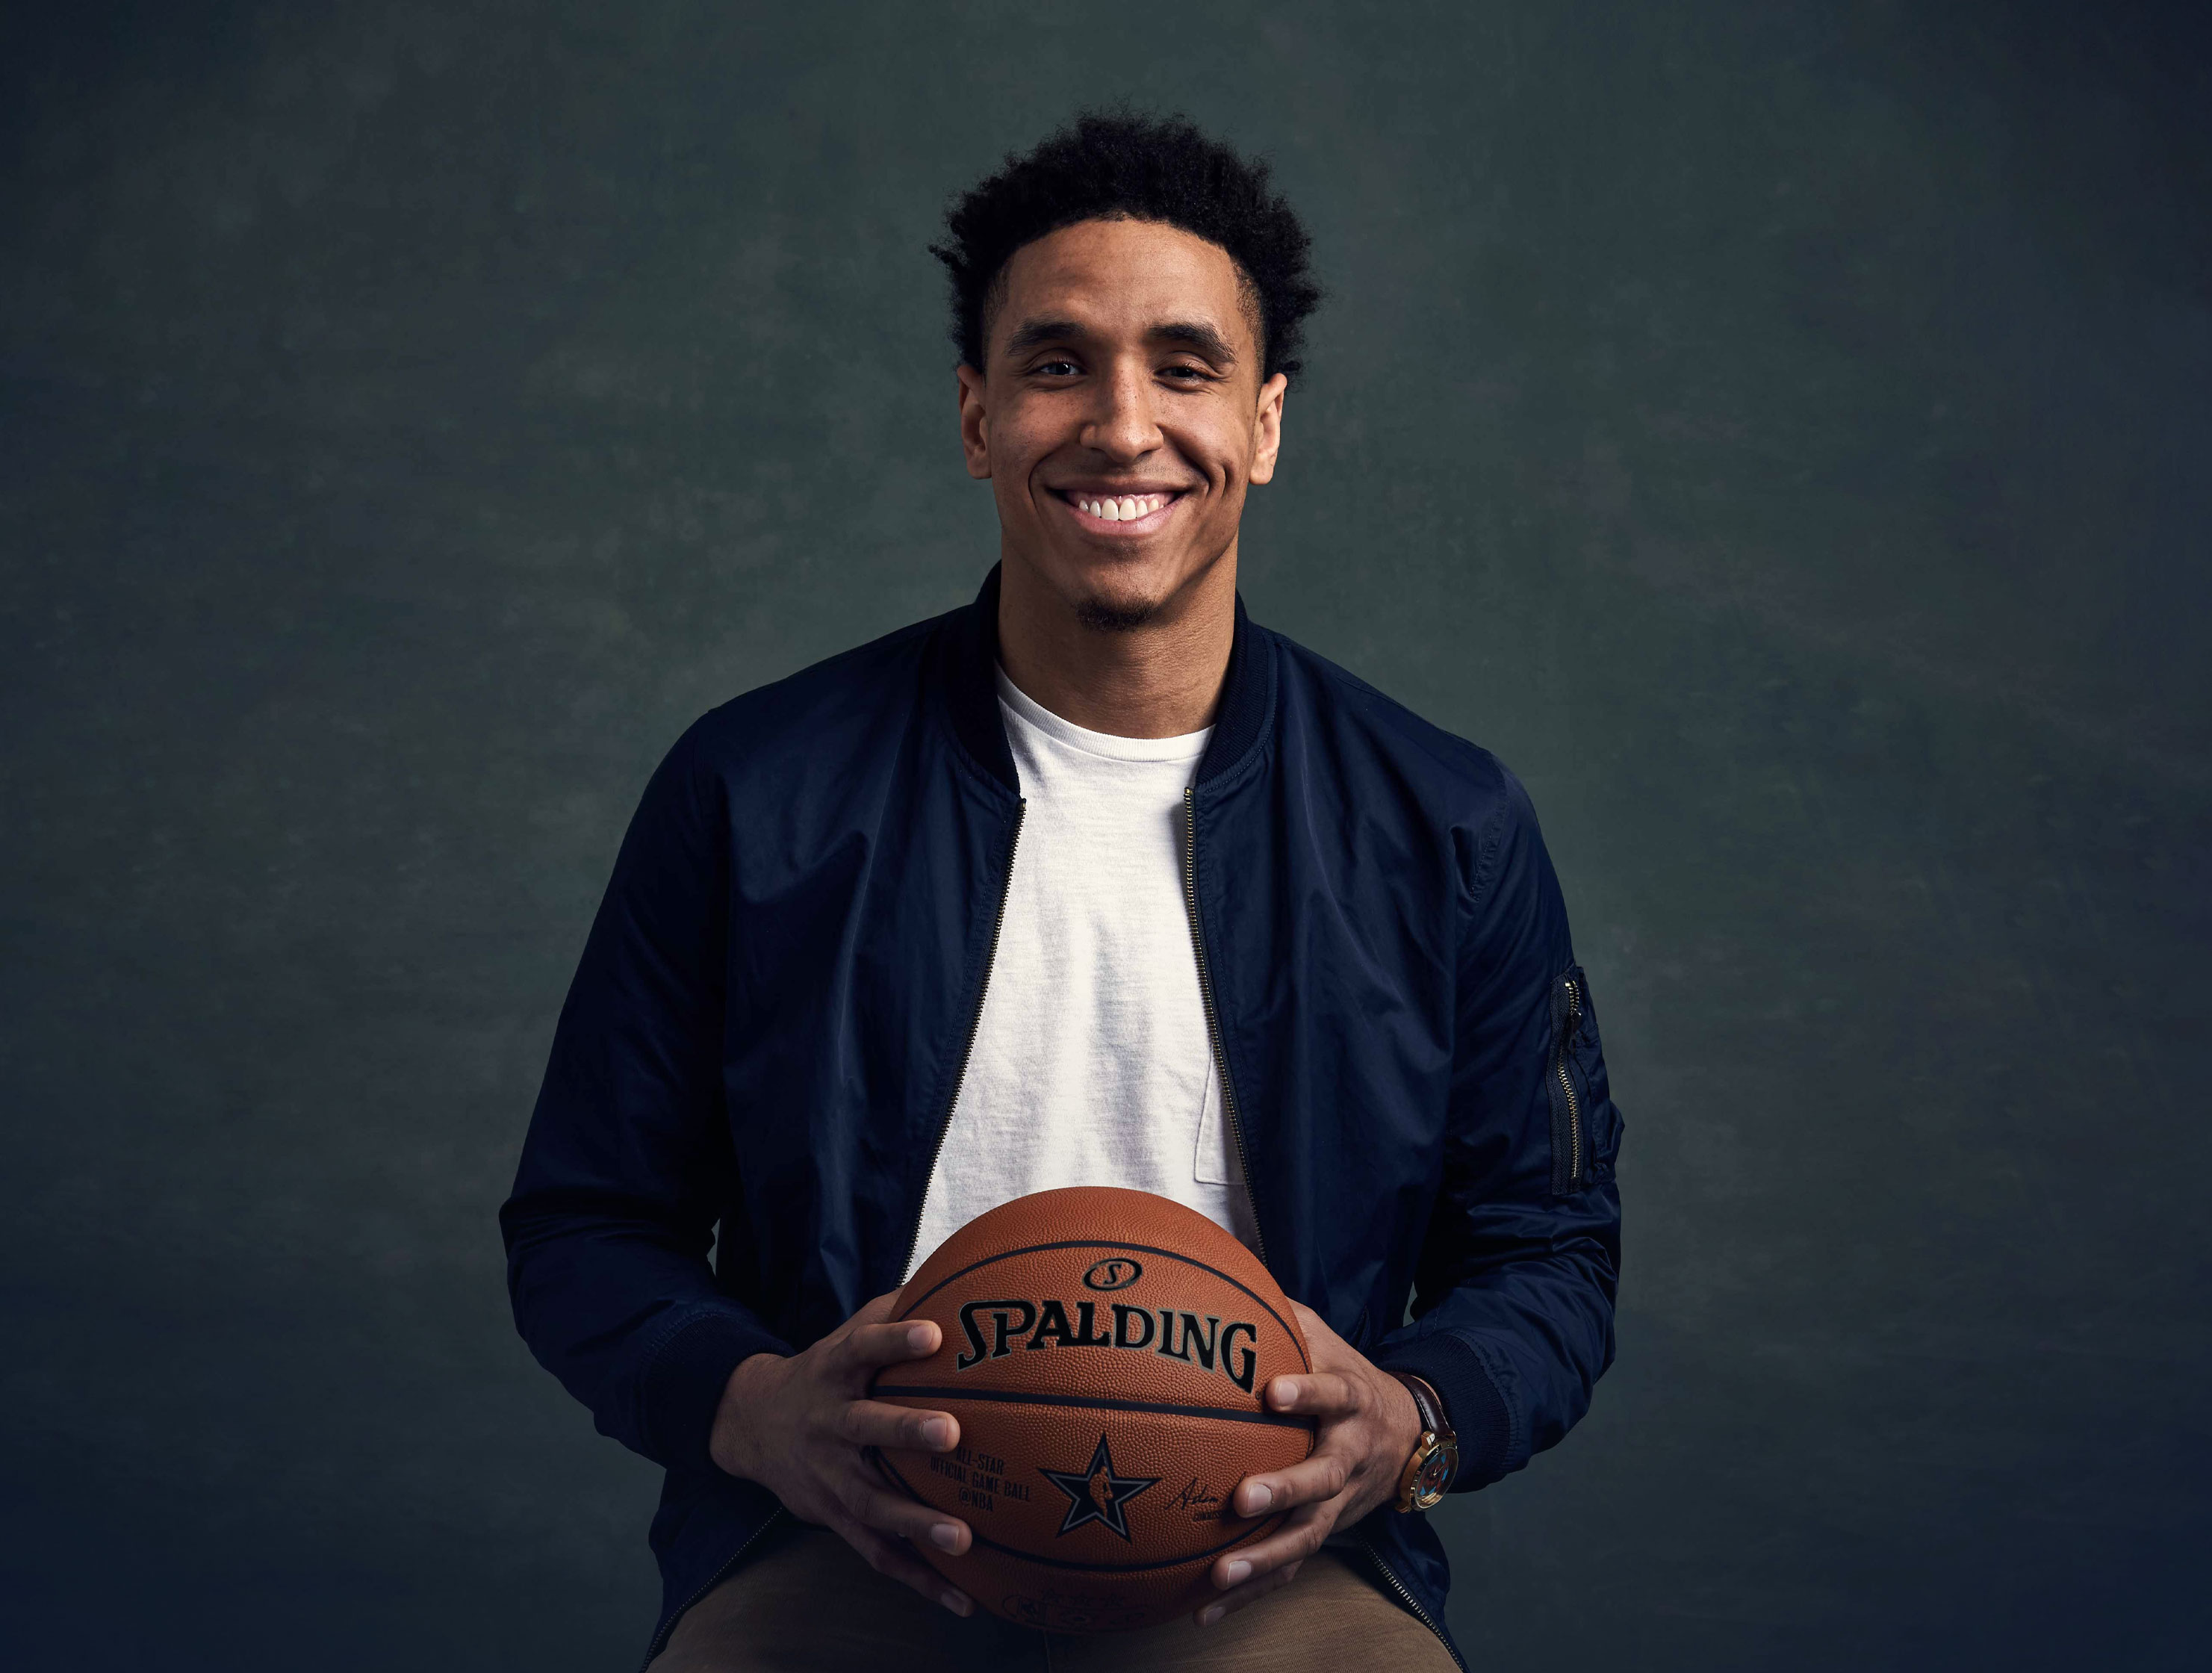 Malcolm Brogdon is already making his mark as one of UVA's top